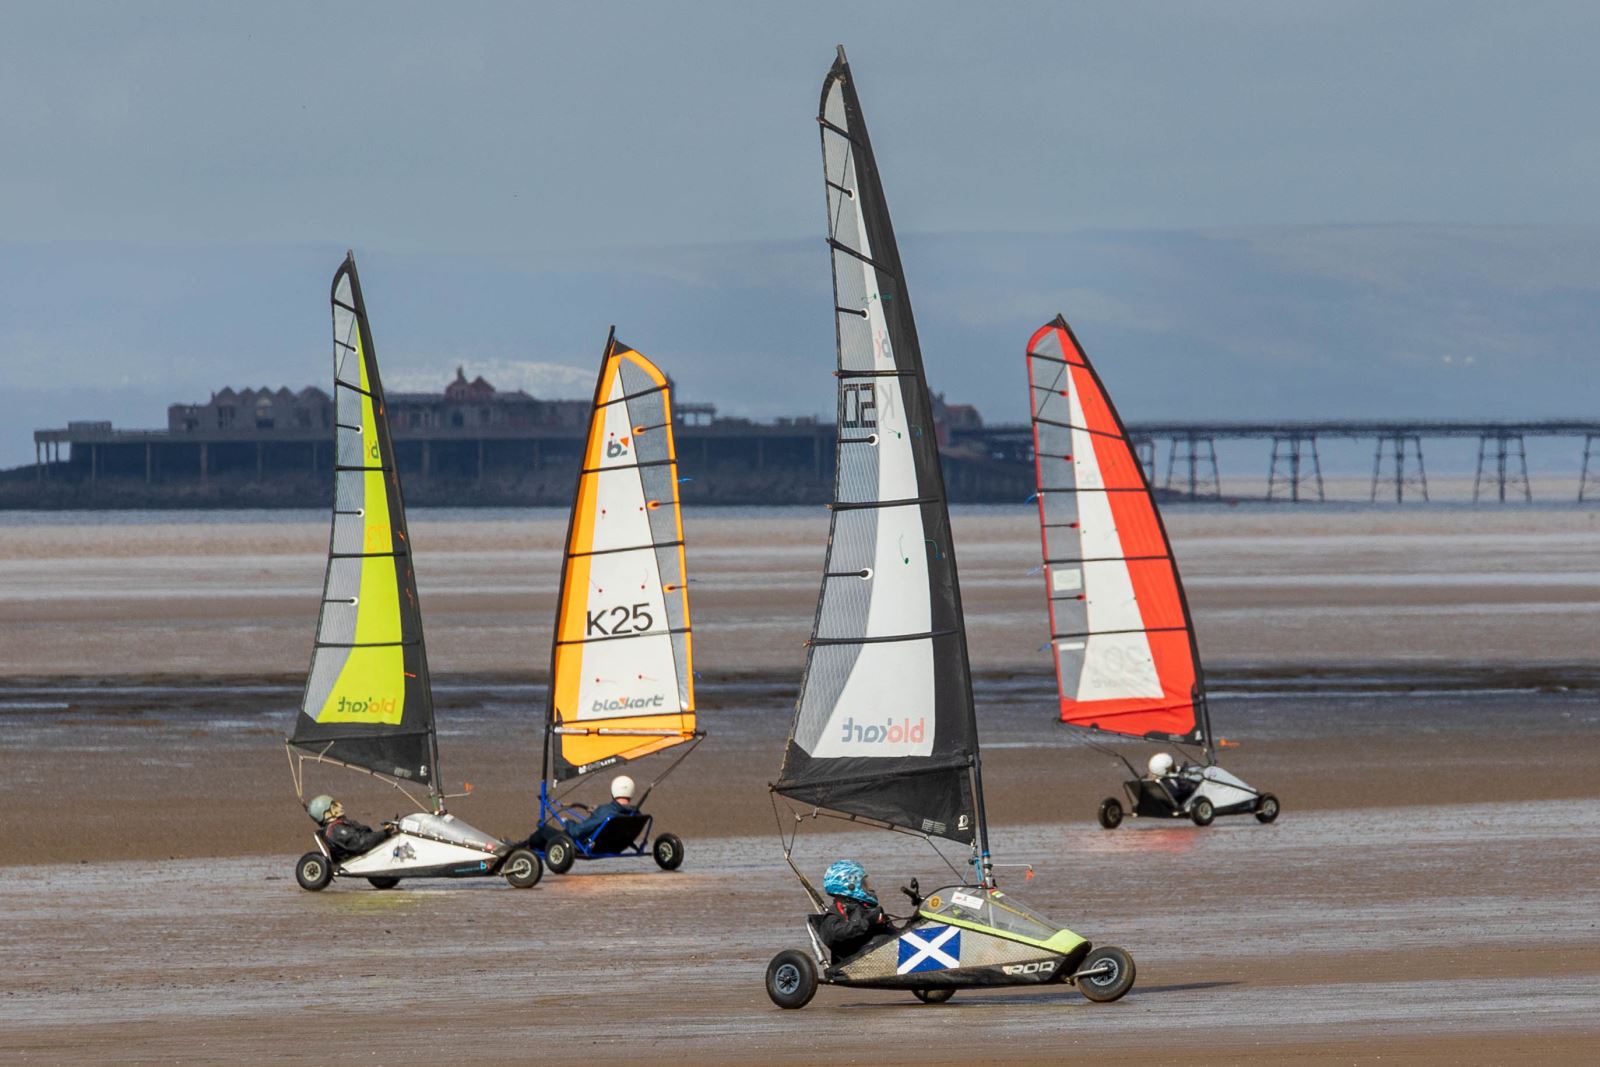 Several land yatchers racing along a sandy beach in their three-wheeled karts with colourful sails